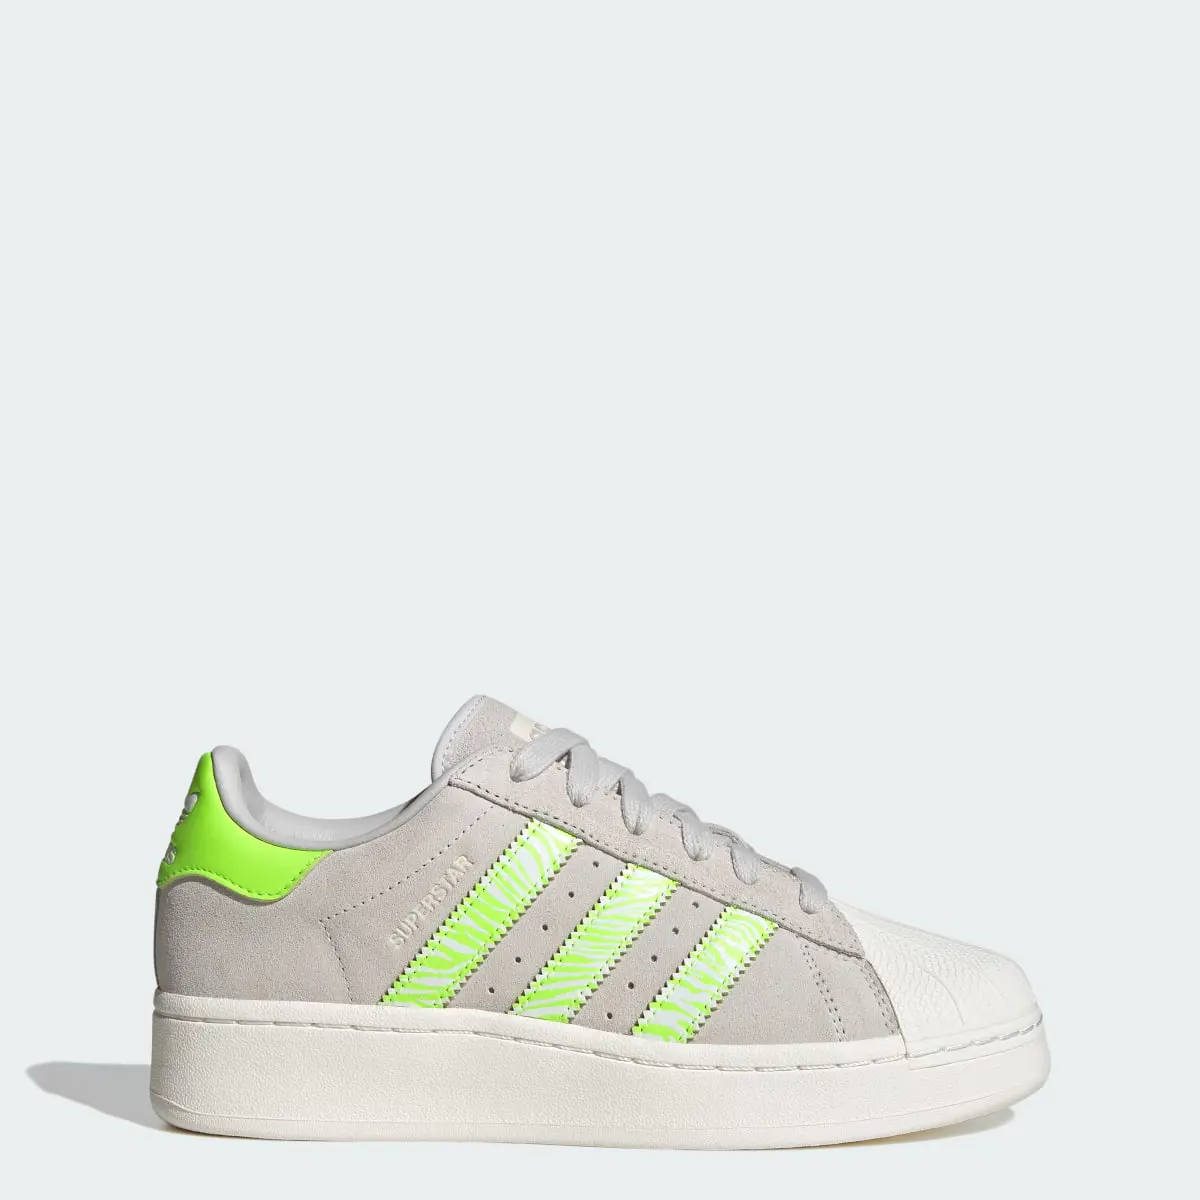 Adidas Superstar XLG Shoes. 1